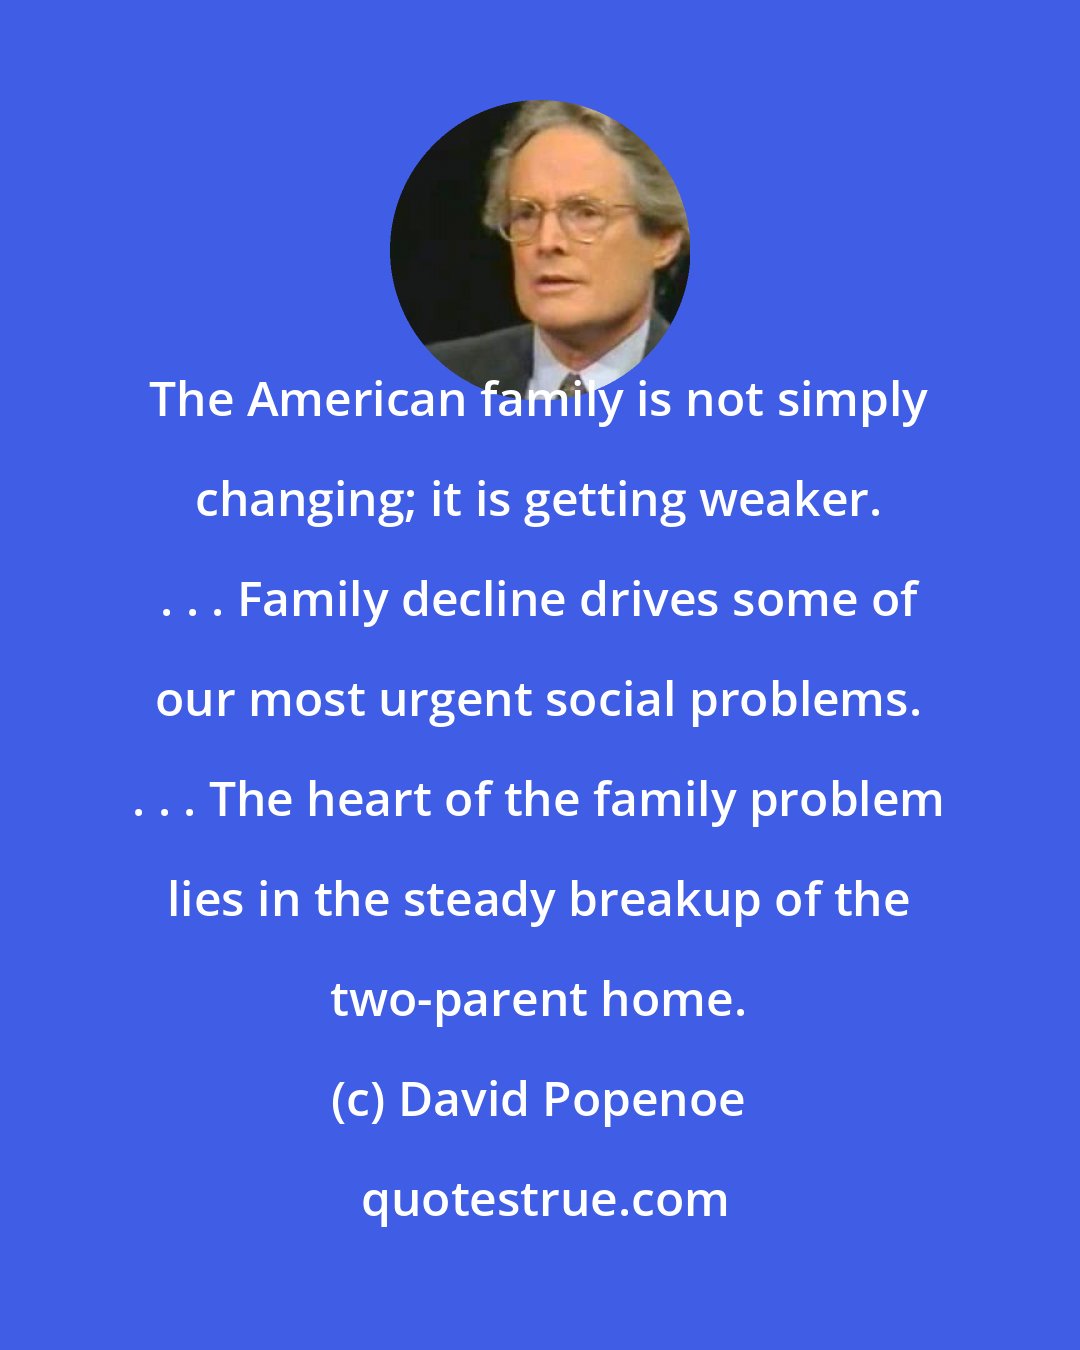 David Popenoe: The American family is not simply changing; it is getting weaker. . . . Family decline drives some of our most urgent social problems. . . . The heart of the family problem lies in the steady breakup of the two-parent home.